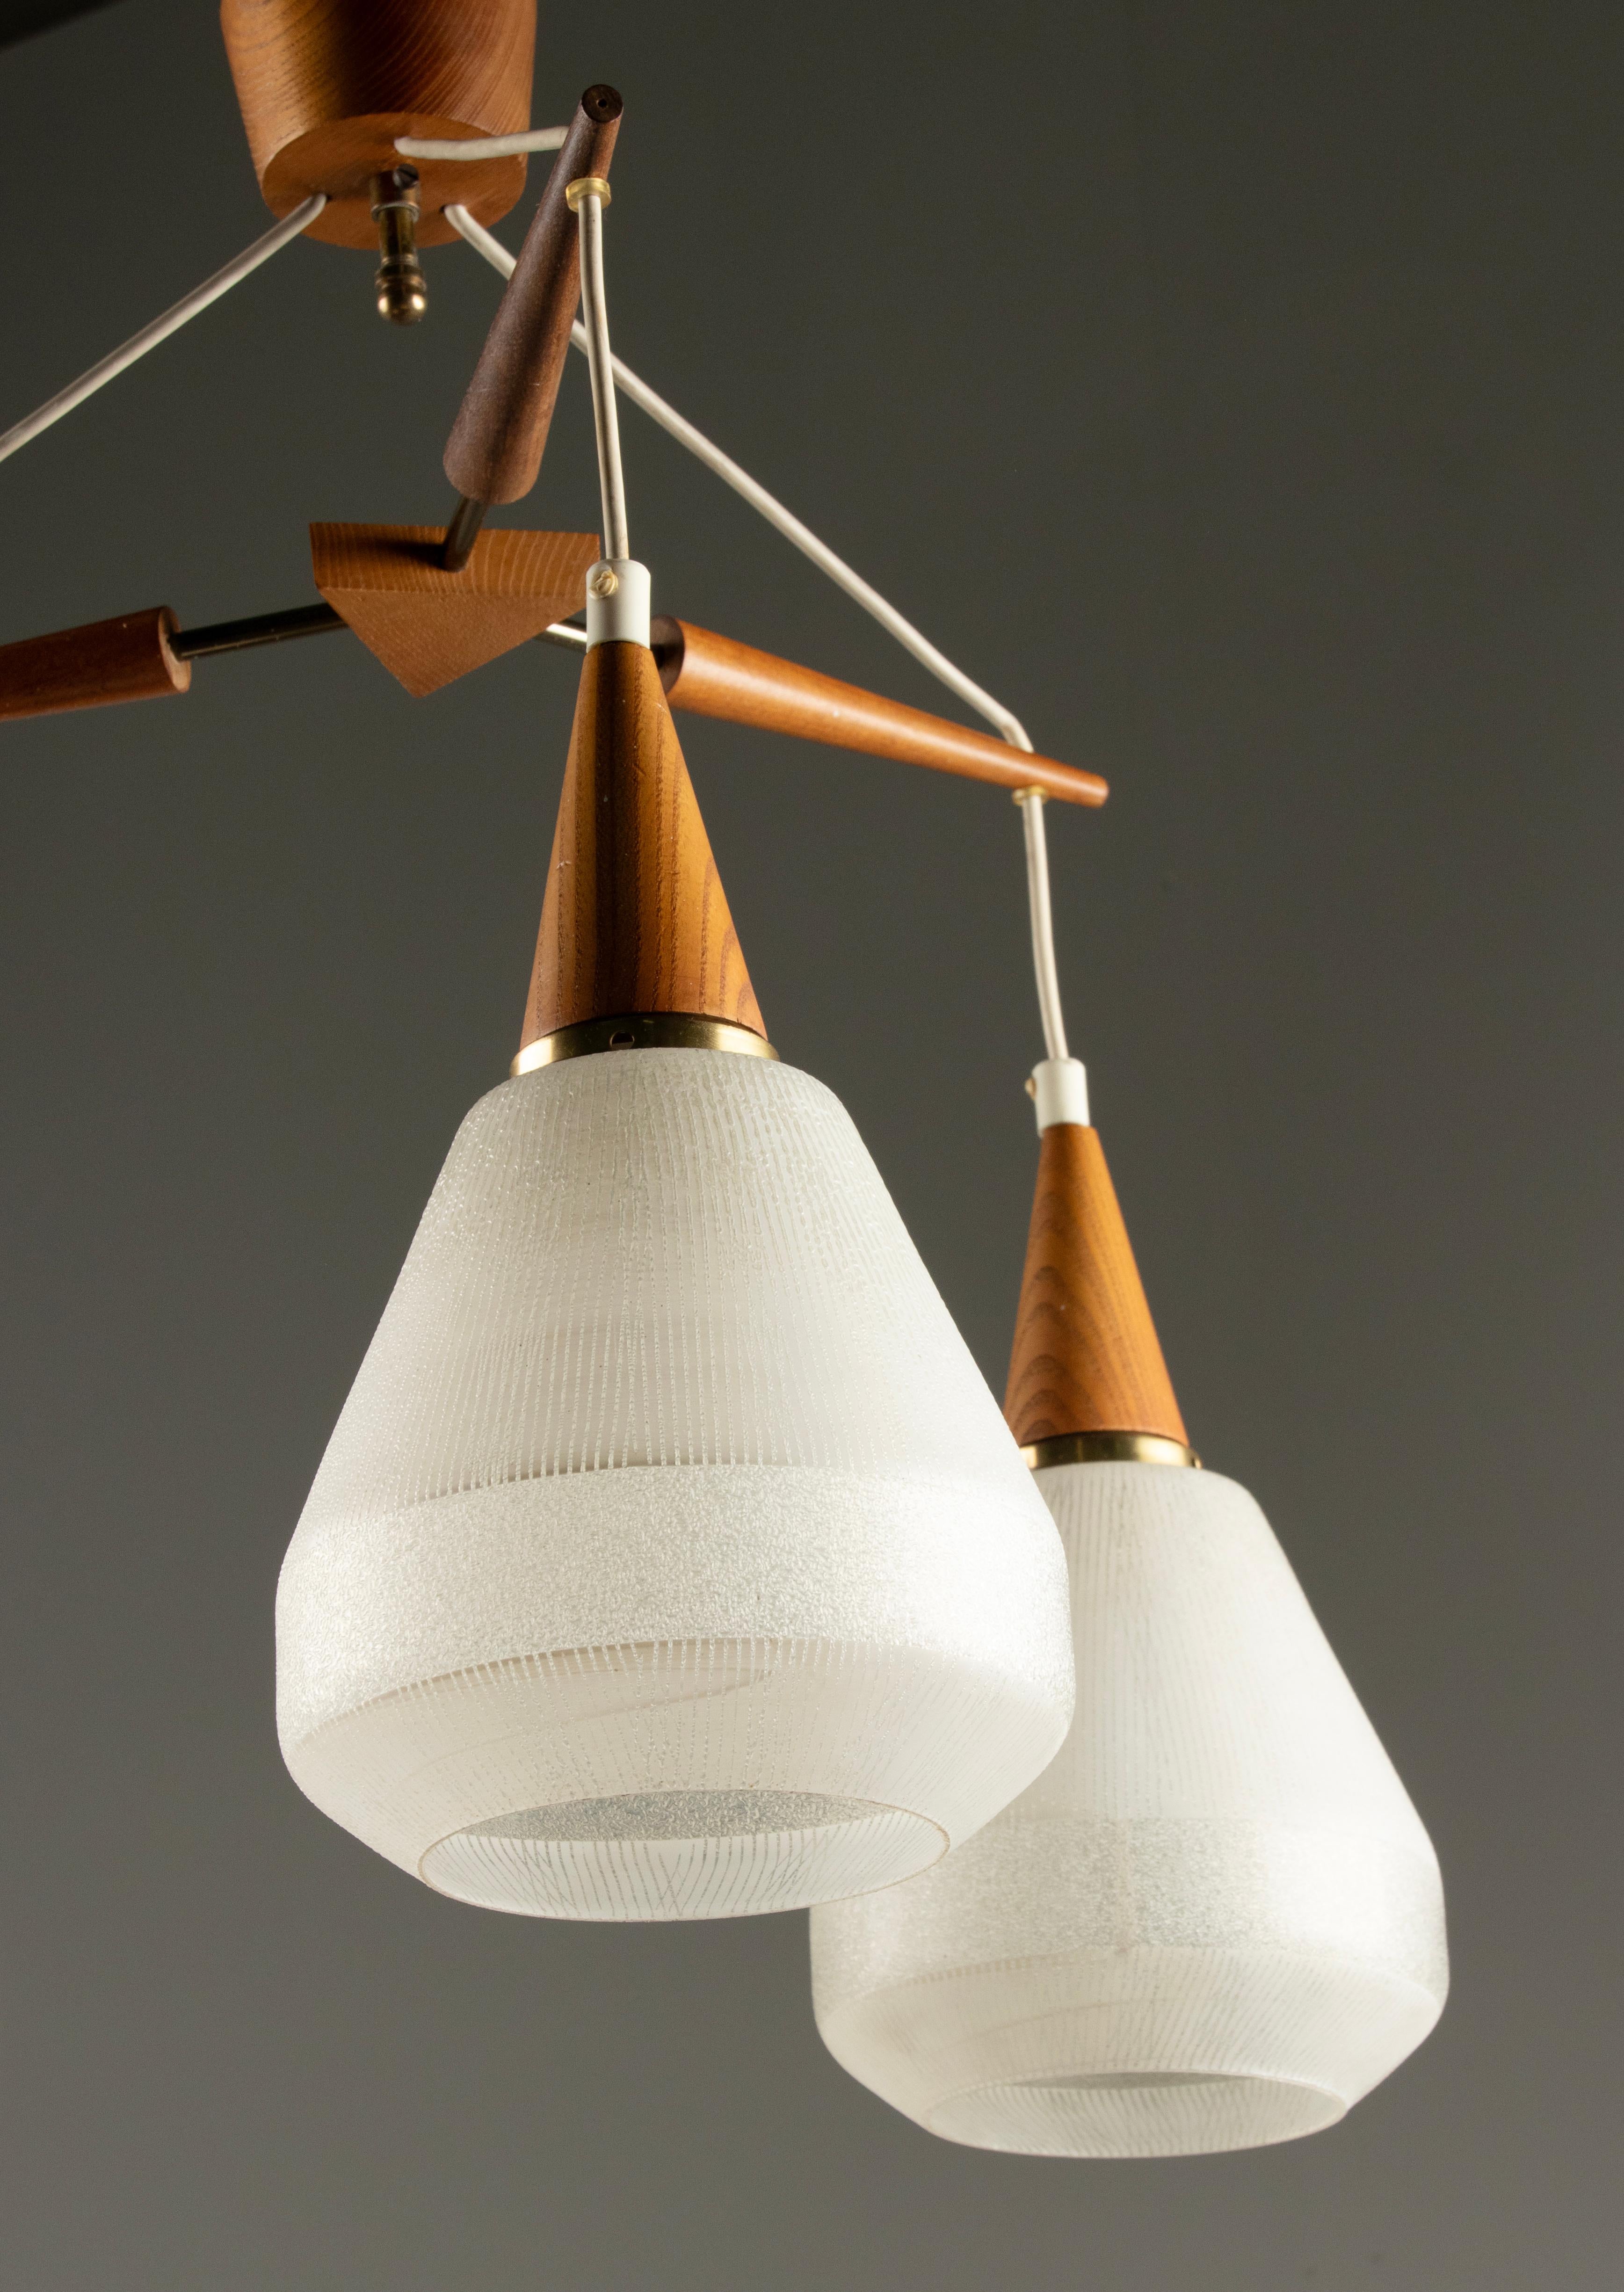 Mid 20th Century Danish Teakwood Pendant Lamp - Frosted Glass Shades For Sale 10